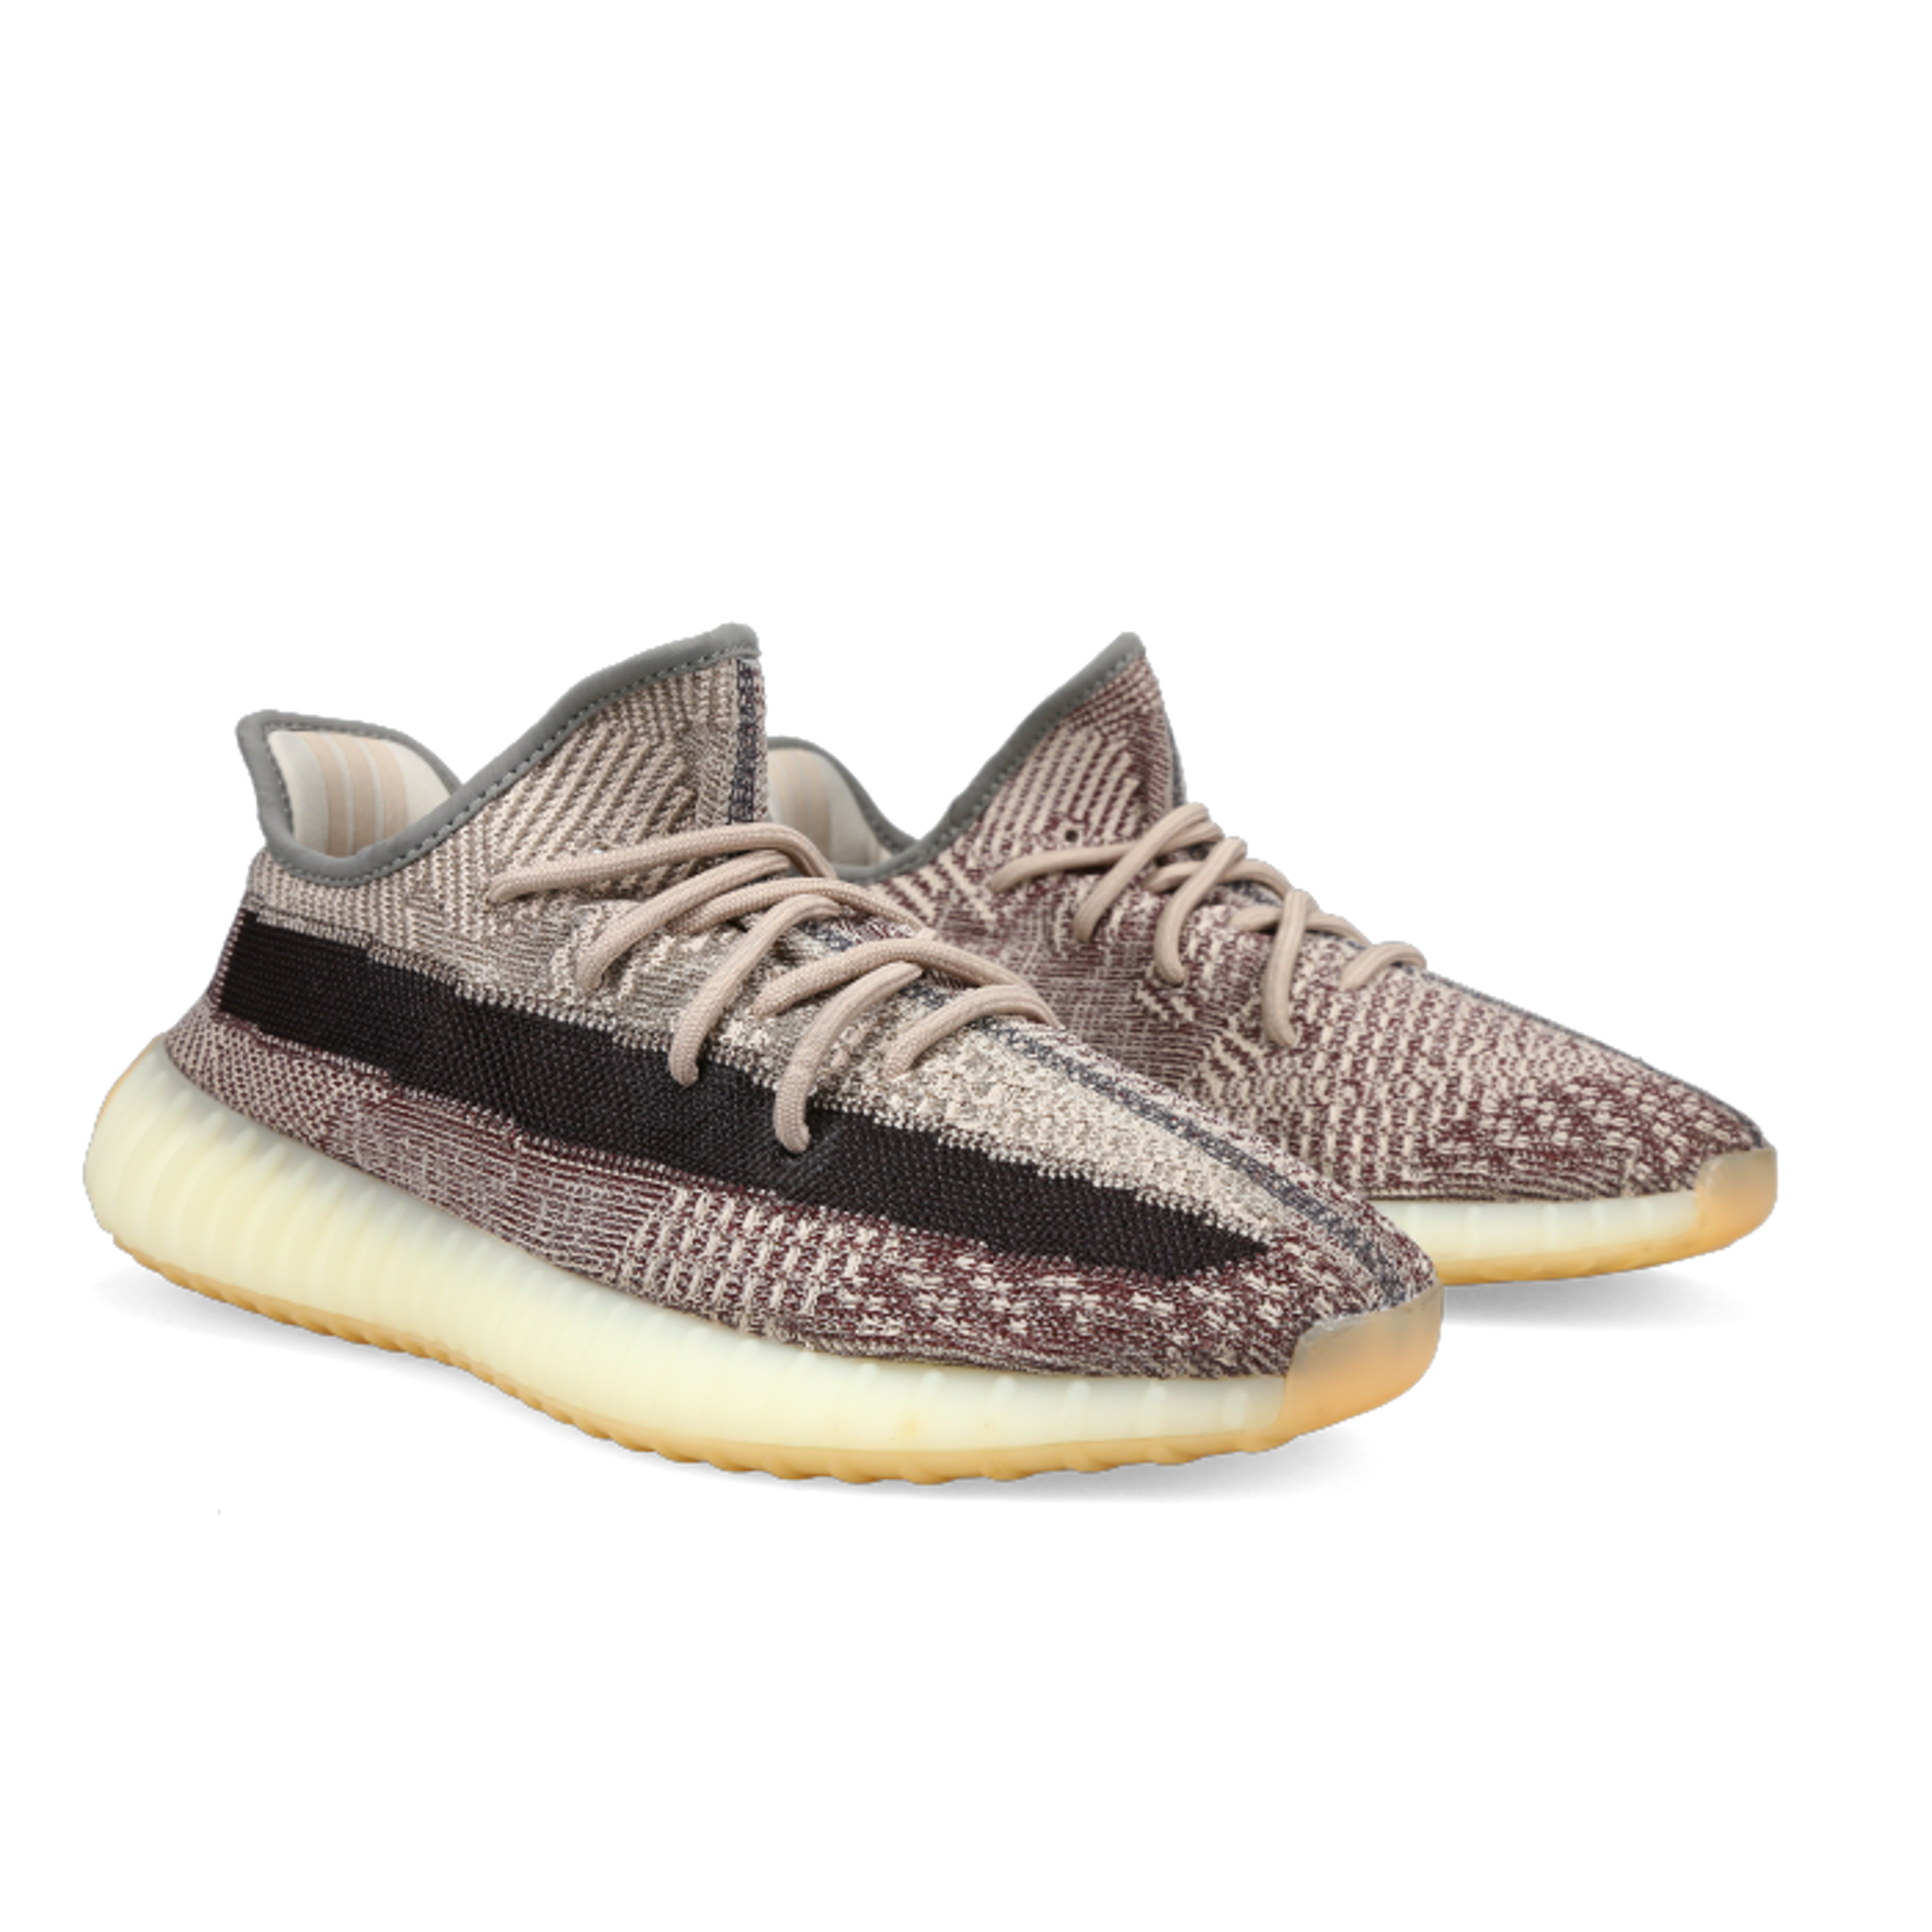 Alternate View 1 of Adidas Yeezy Boost 350 V2 'Zyon'